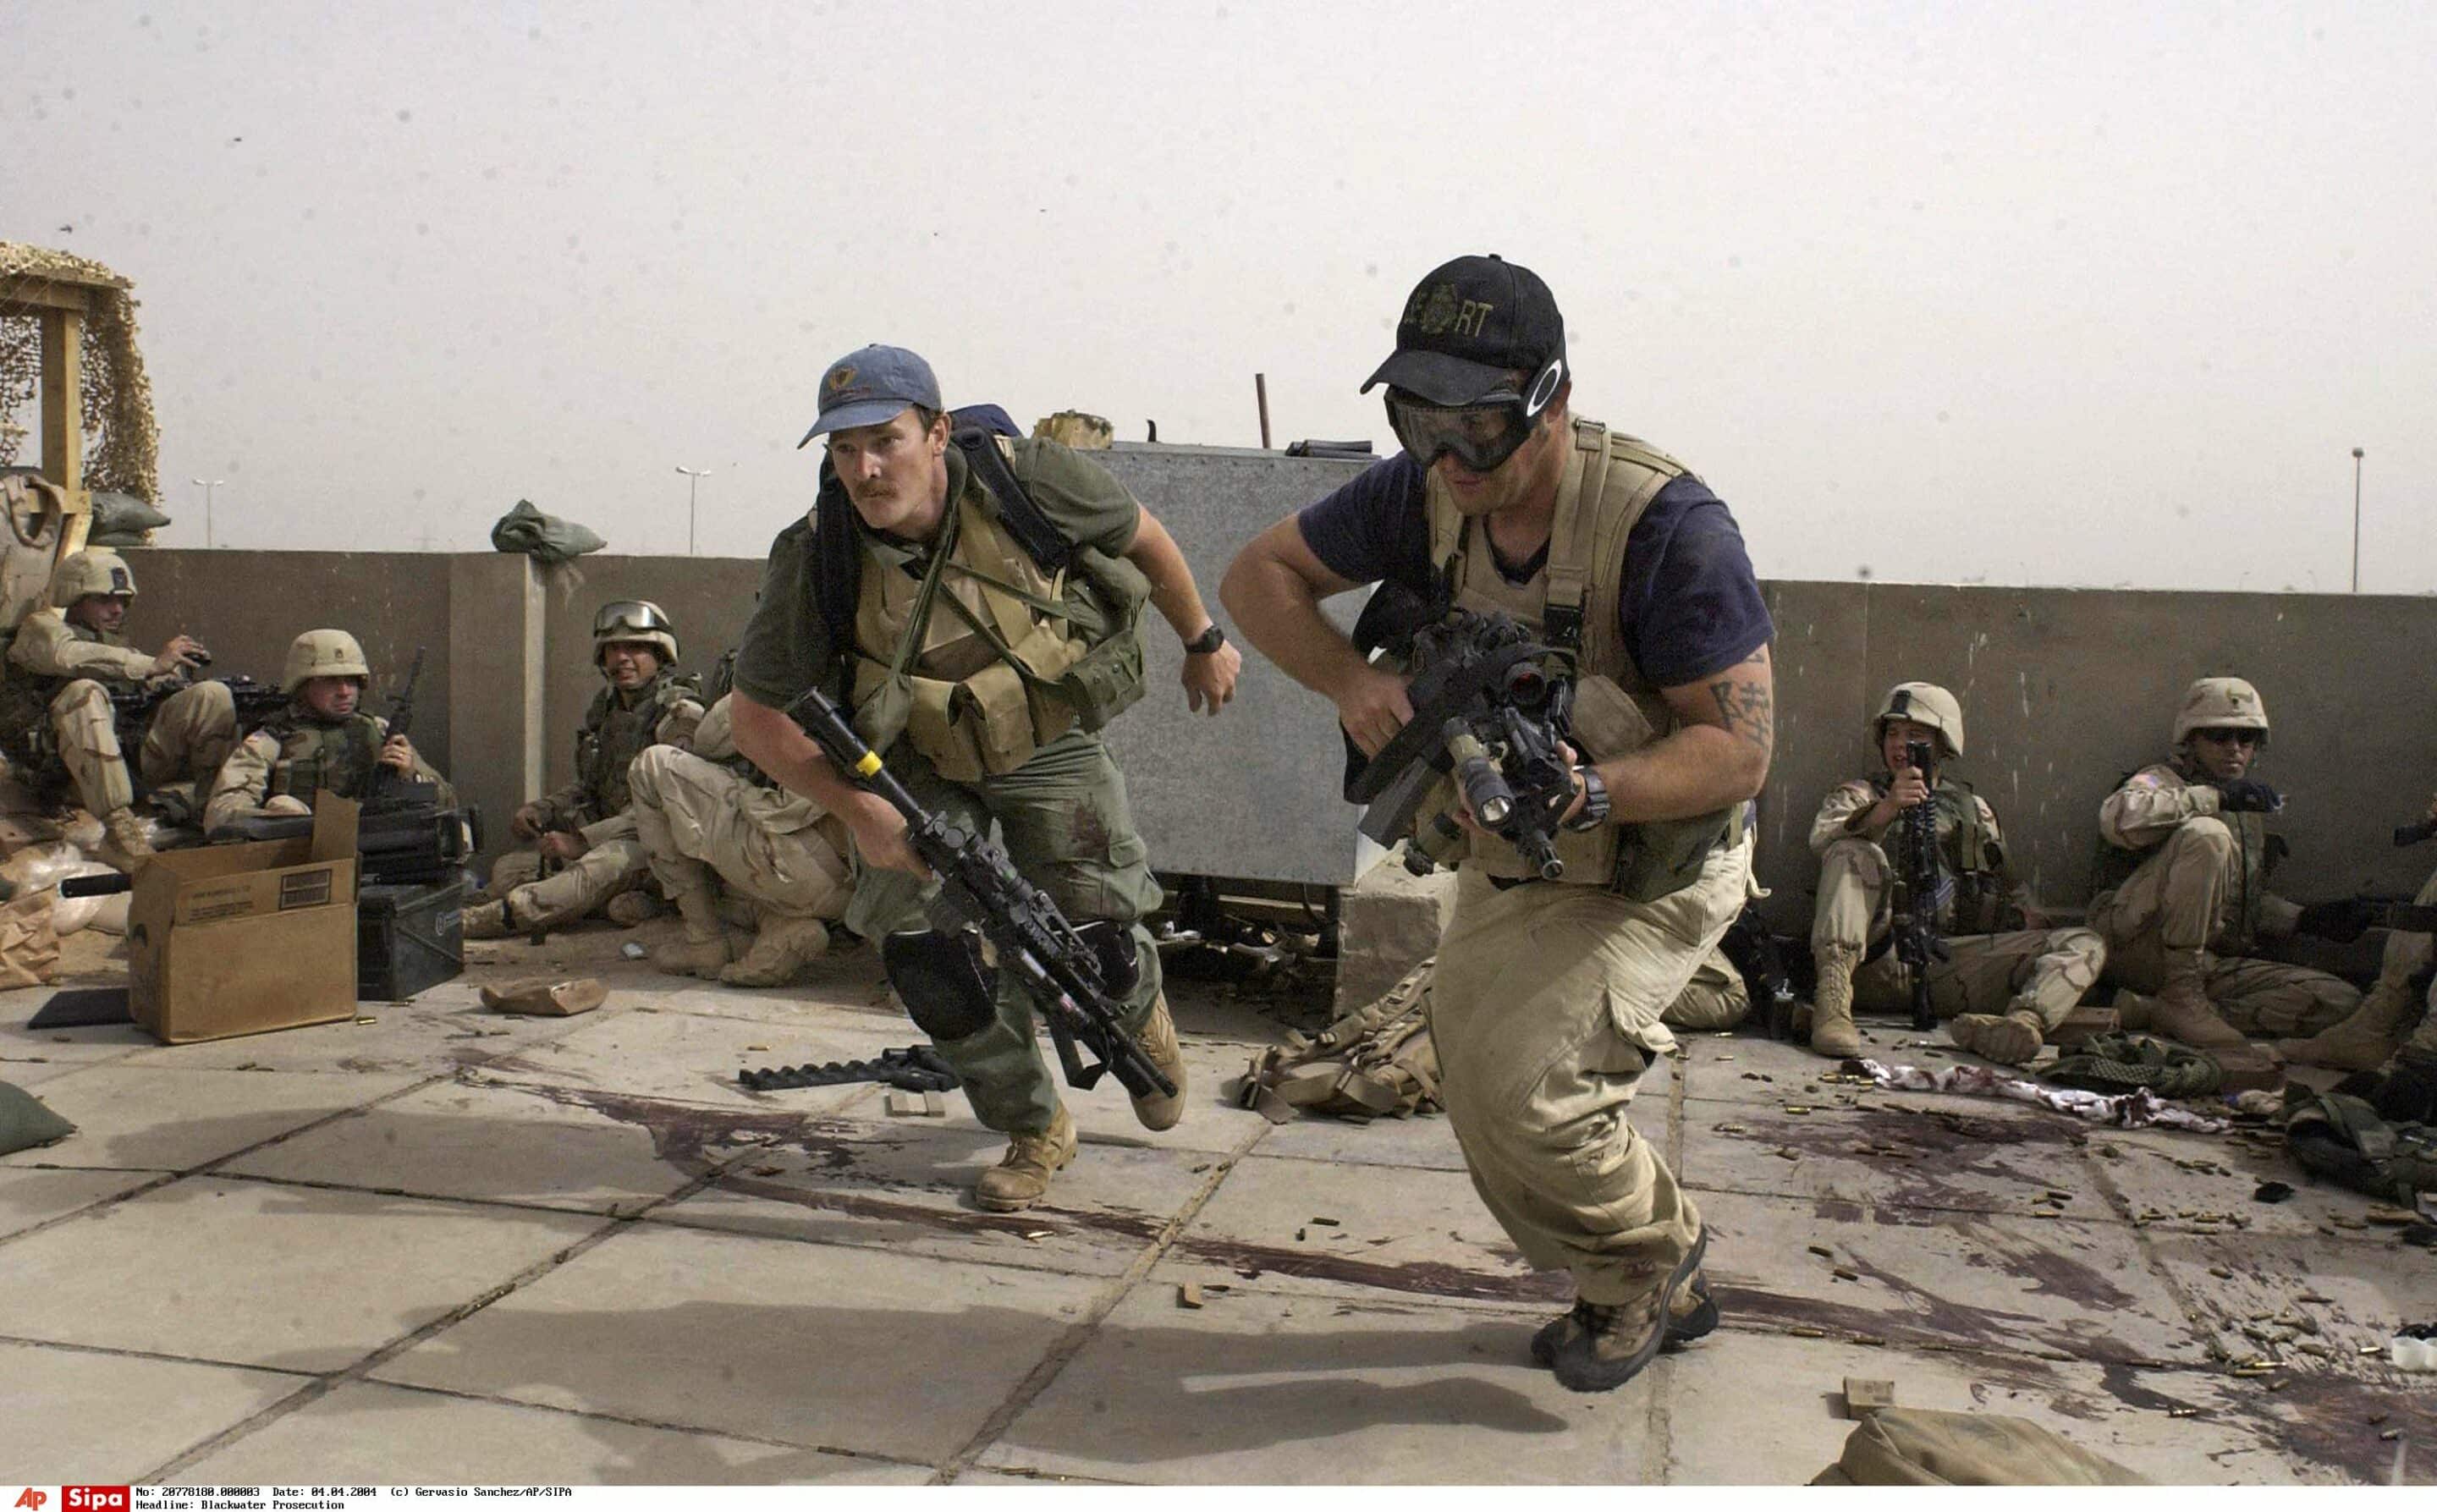 ** FILE  ** Plainclothes contractors working for Blackwater USA take part in a firefight as Iraqi demonstrators loyal to Muqtada Al Sadr attempt to advance on a facility being defended by U.S. and Spanish soldiers in Najaf, Iraq in this April 4, 2004 file photo. The Blackwater USA contractors were actively involved in defending the position.  (AP Photo/Gervasio Sanchez, File)/Blackwater_Prosecution_WX107/AN APRIL 4, 2004 FILE PHOTO/0812050452